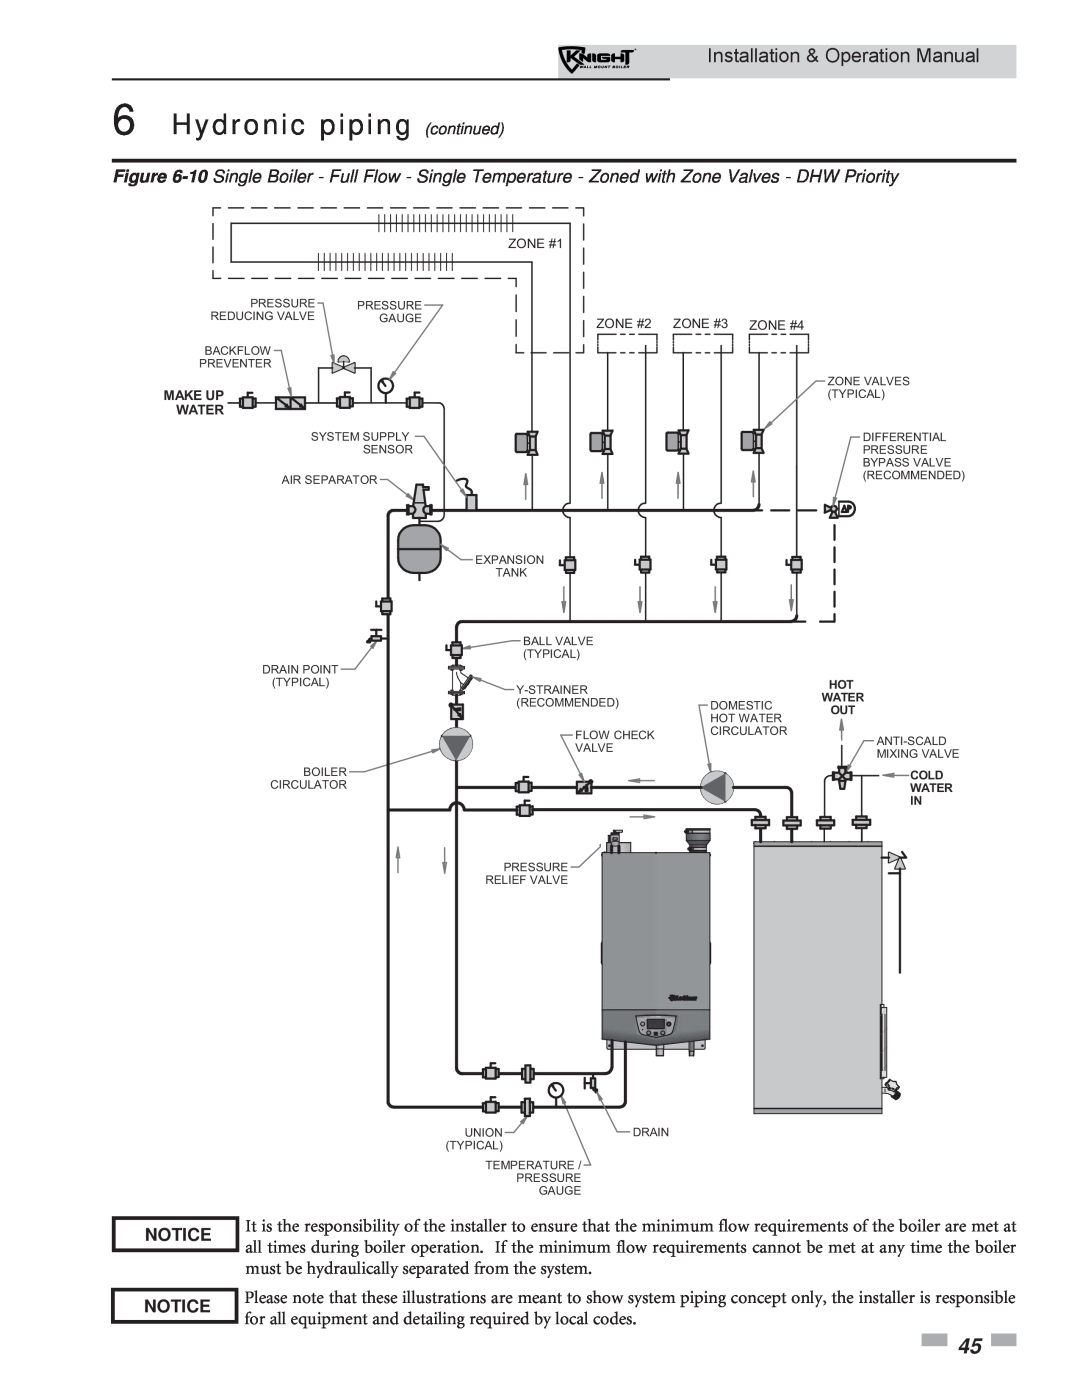 Lochinvar WH 55-399 Hydronic piping continued, Installation & Operation Manual, Notice Notice, Boiler, Water 